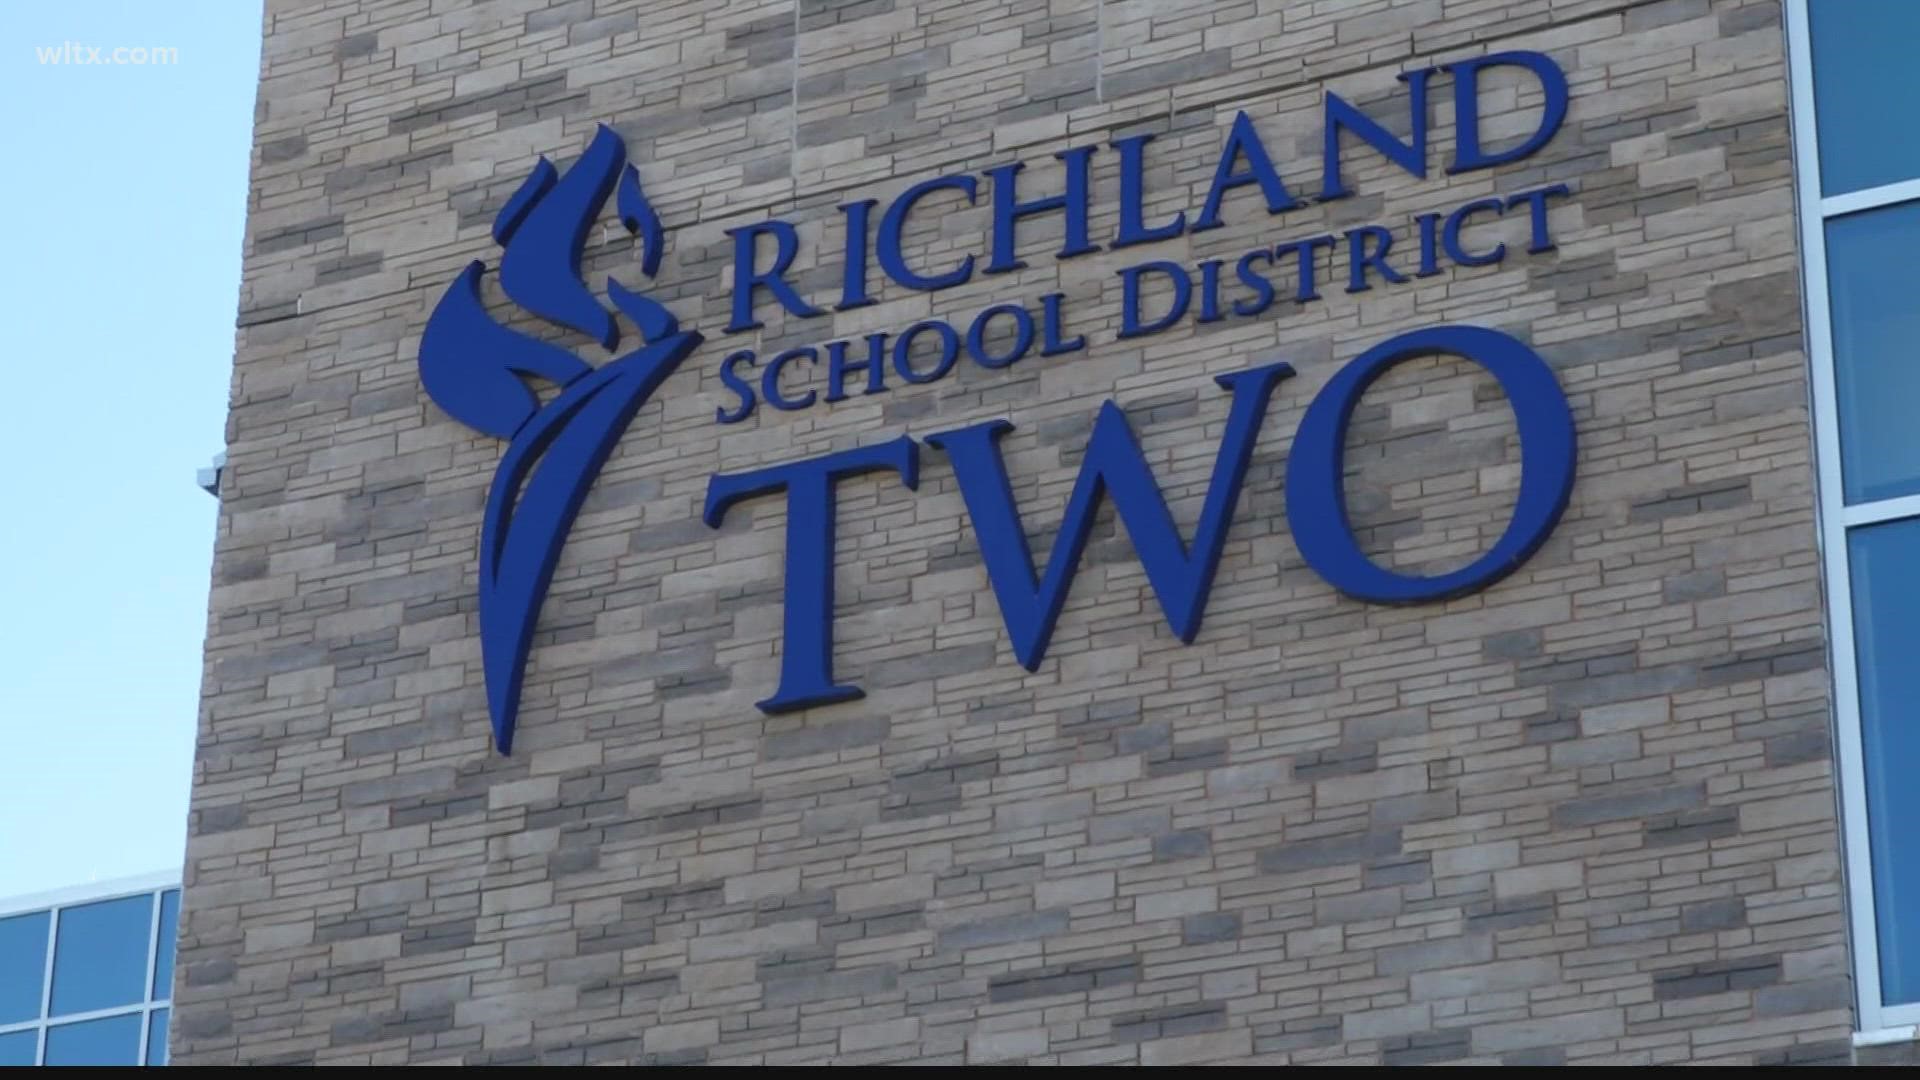 On Wednesday, Richland District Two school board members met for the first time since a fellow board member was arrested.